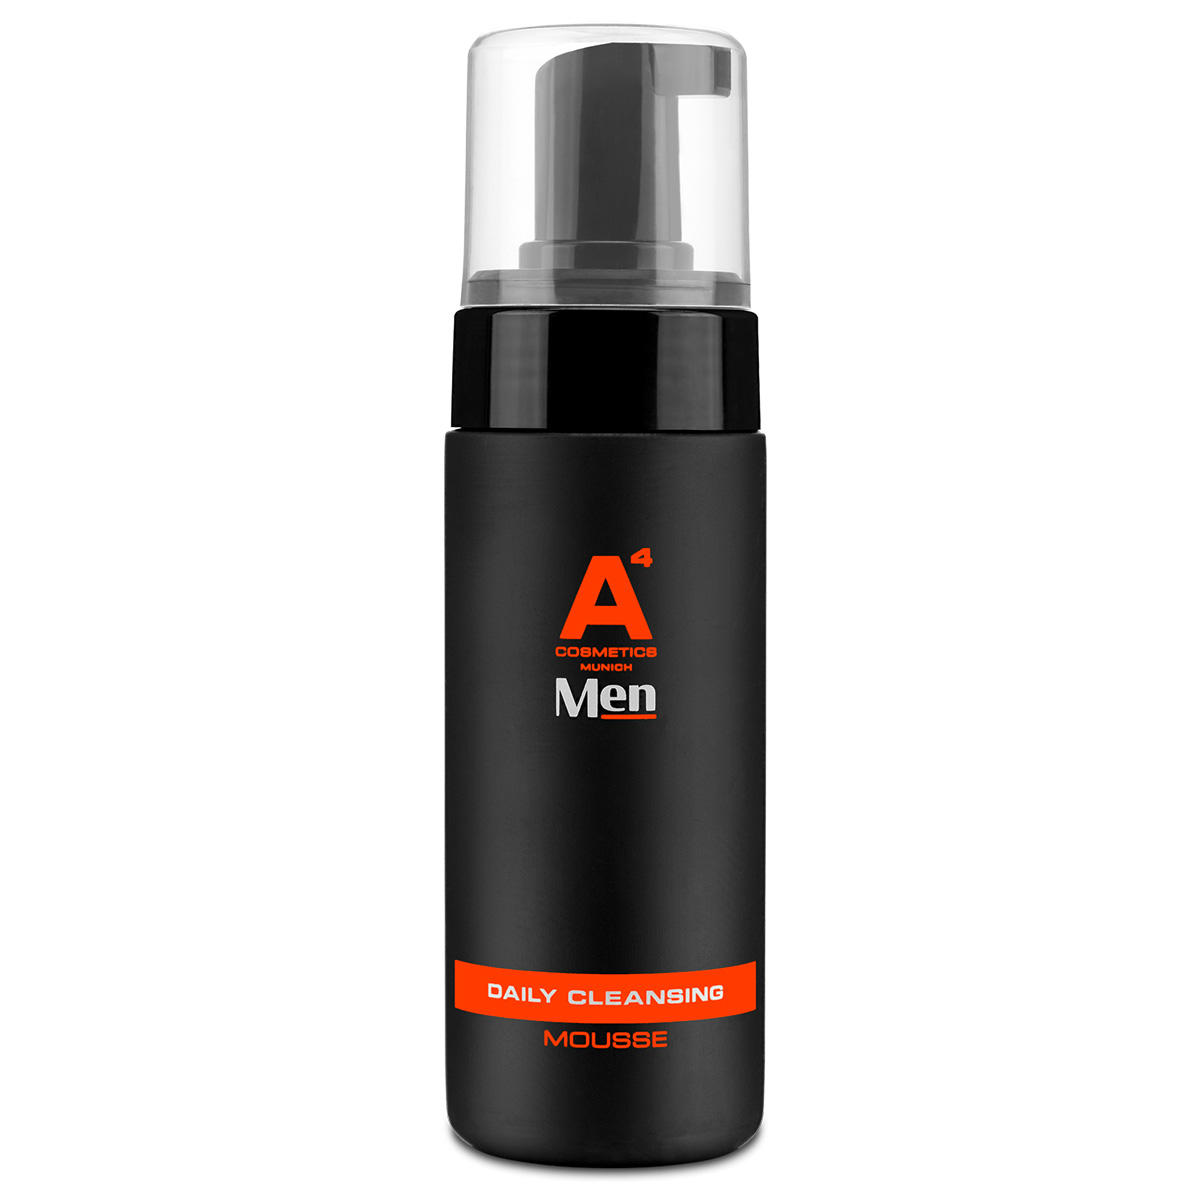 A4 Cosmetics Men Daily Cleansing Mousse 150 ml - 1